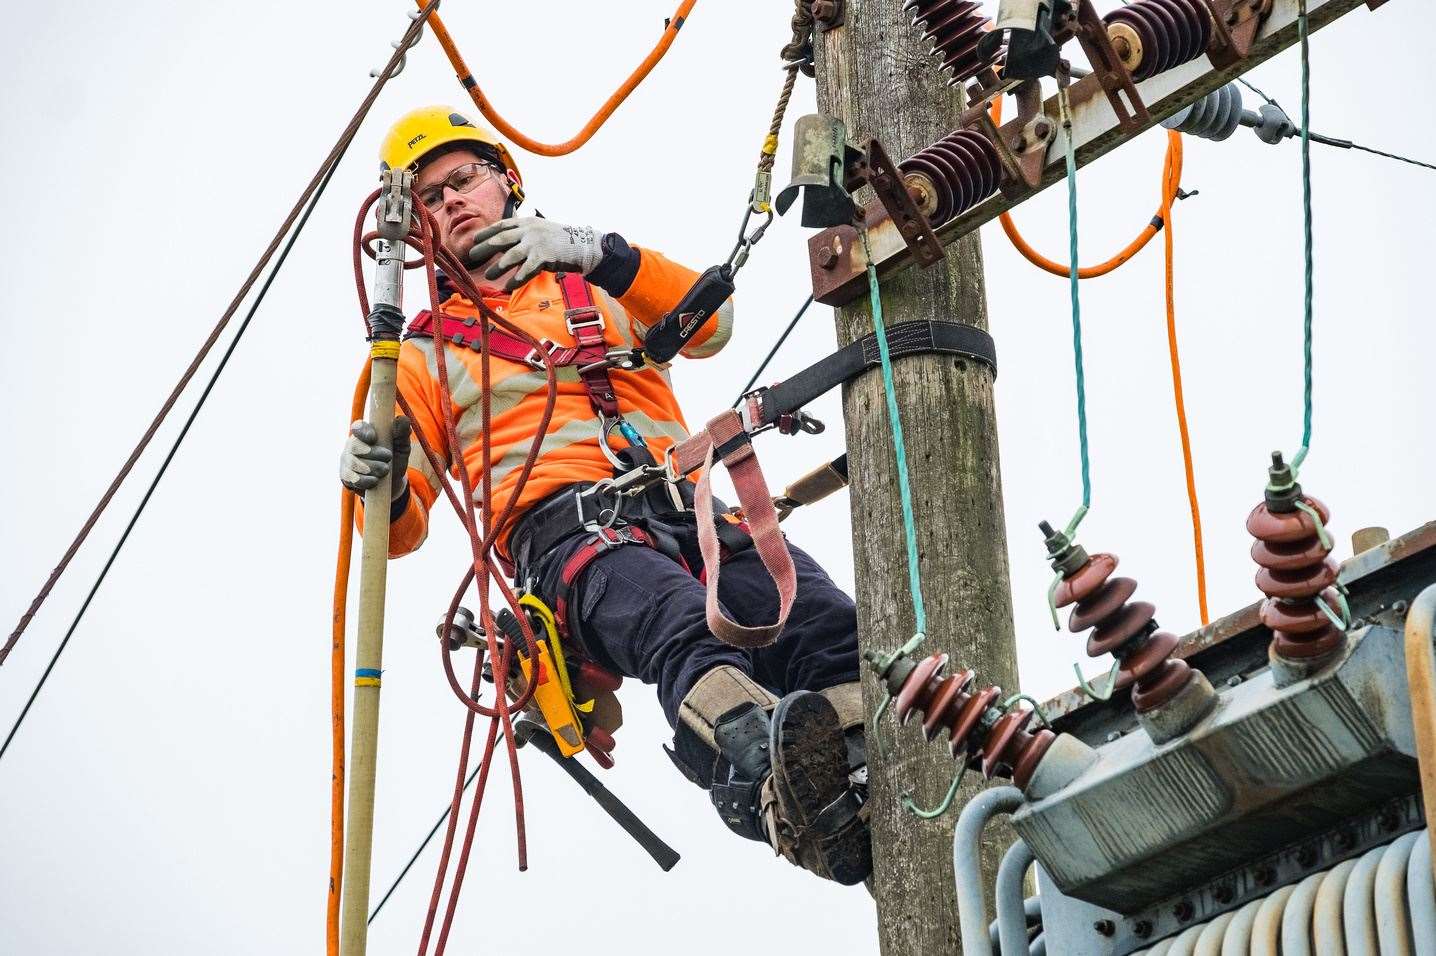 SSEN distribution is set to begin work on a £140,000 upgrade of the Nairn electricity network.